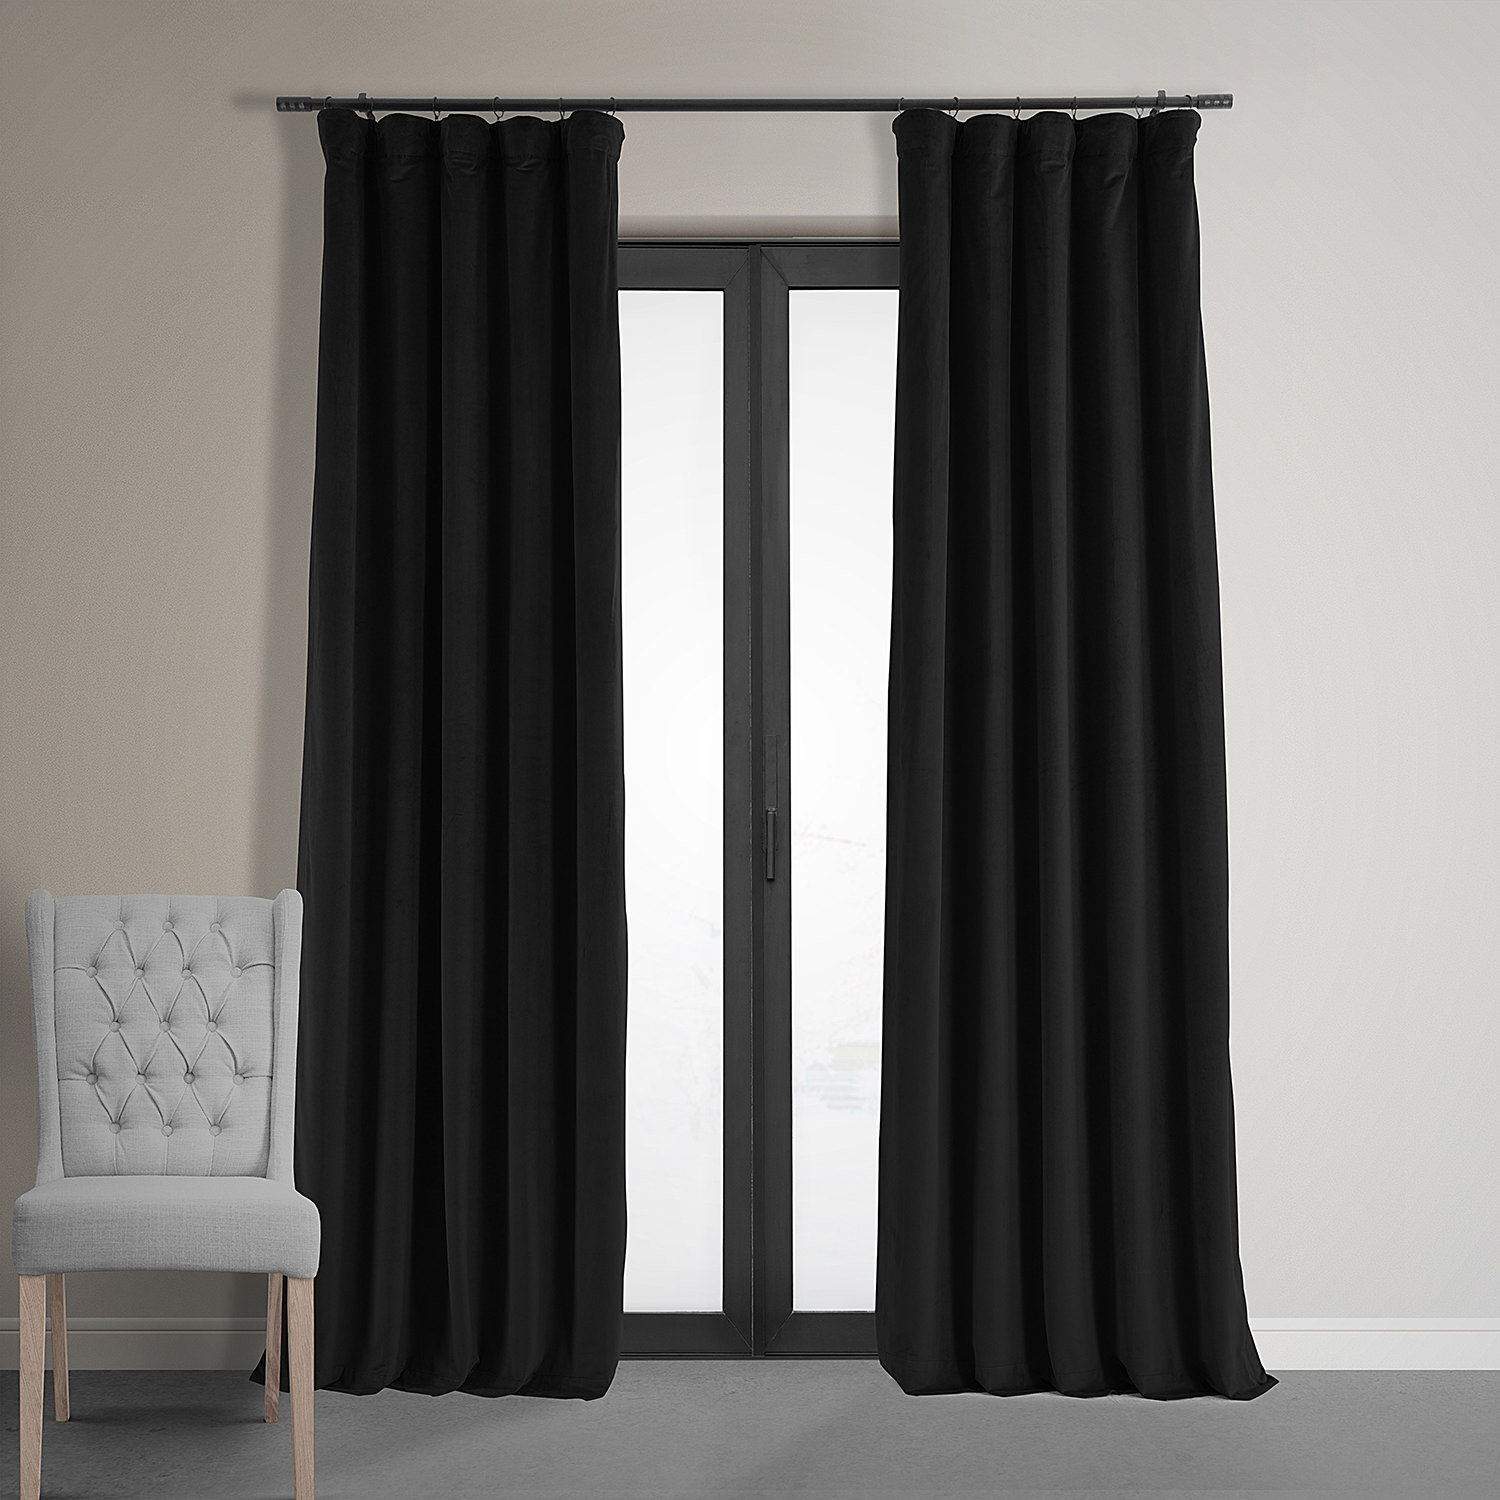 New Curtain Stage Blackout  Custom Sizes Available Made in Canada Grey#101 